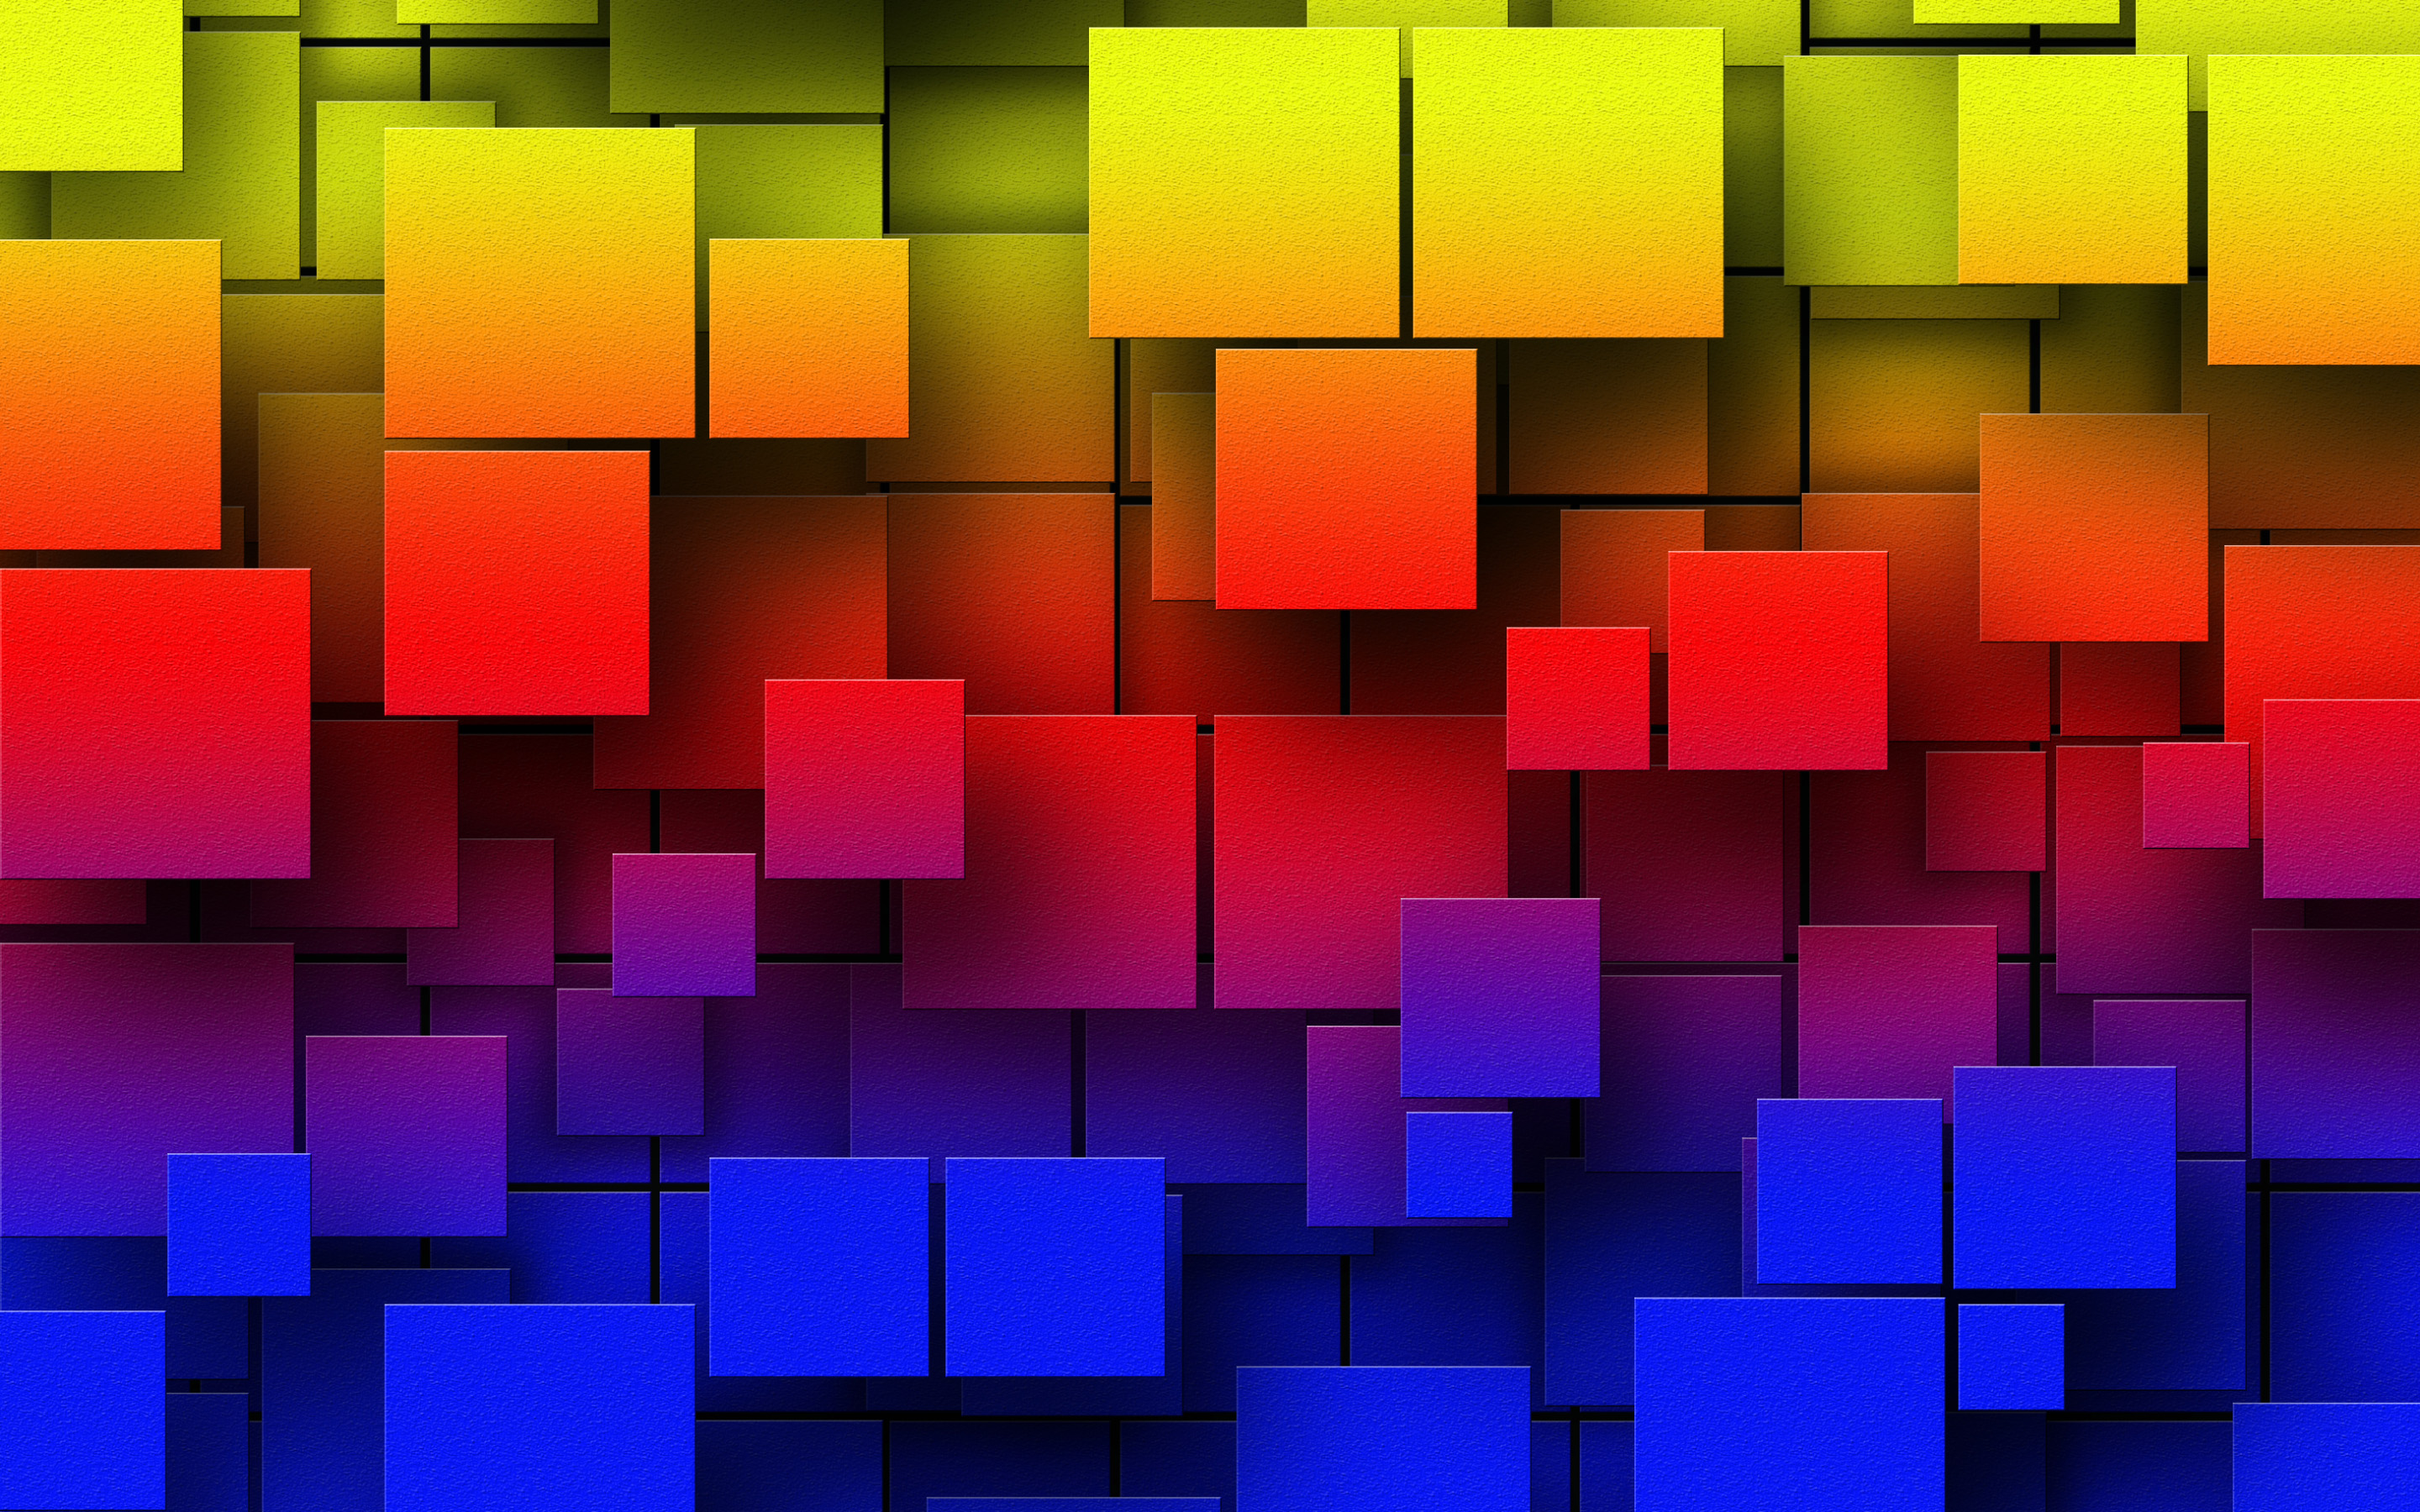 Download wallpaper colorful cubes, creative, 3D cubes texture, rainbow background, colorful background, square textures, abstract background for desktop with resolution 2880x1800. High Quality HD picture wallpaper